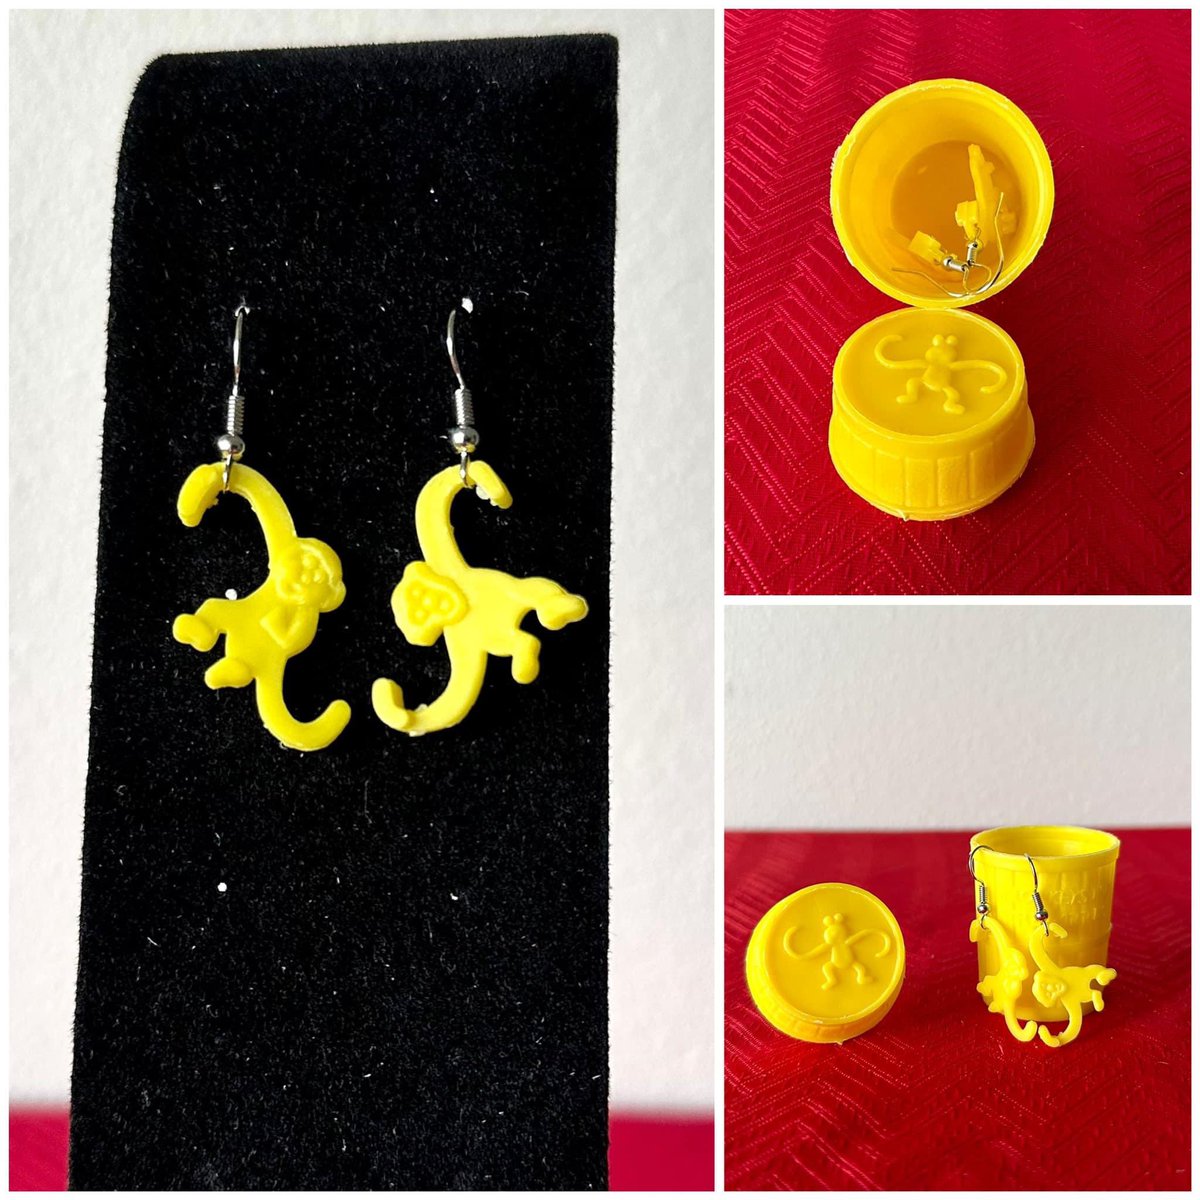 Earrings of Yellow Monkeys with Barrel
(Exact pose of the #monkeys may vary)

Available in my Square shop:
justaskcassie.square.site/product/earrin…

#yellowmonkeys #monkeyearrings #monkeyjewelry #yellowearrings #yellow #yellowjewelry #cute #cutejewelry #cuteearrings #nostalgia #barrelofmonkeys